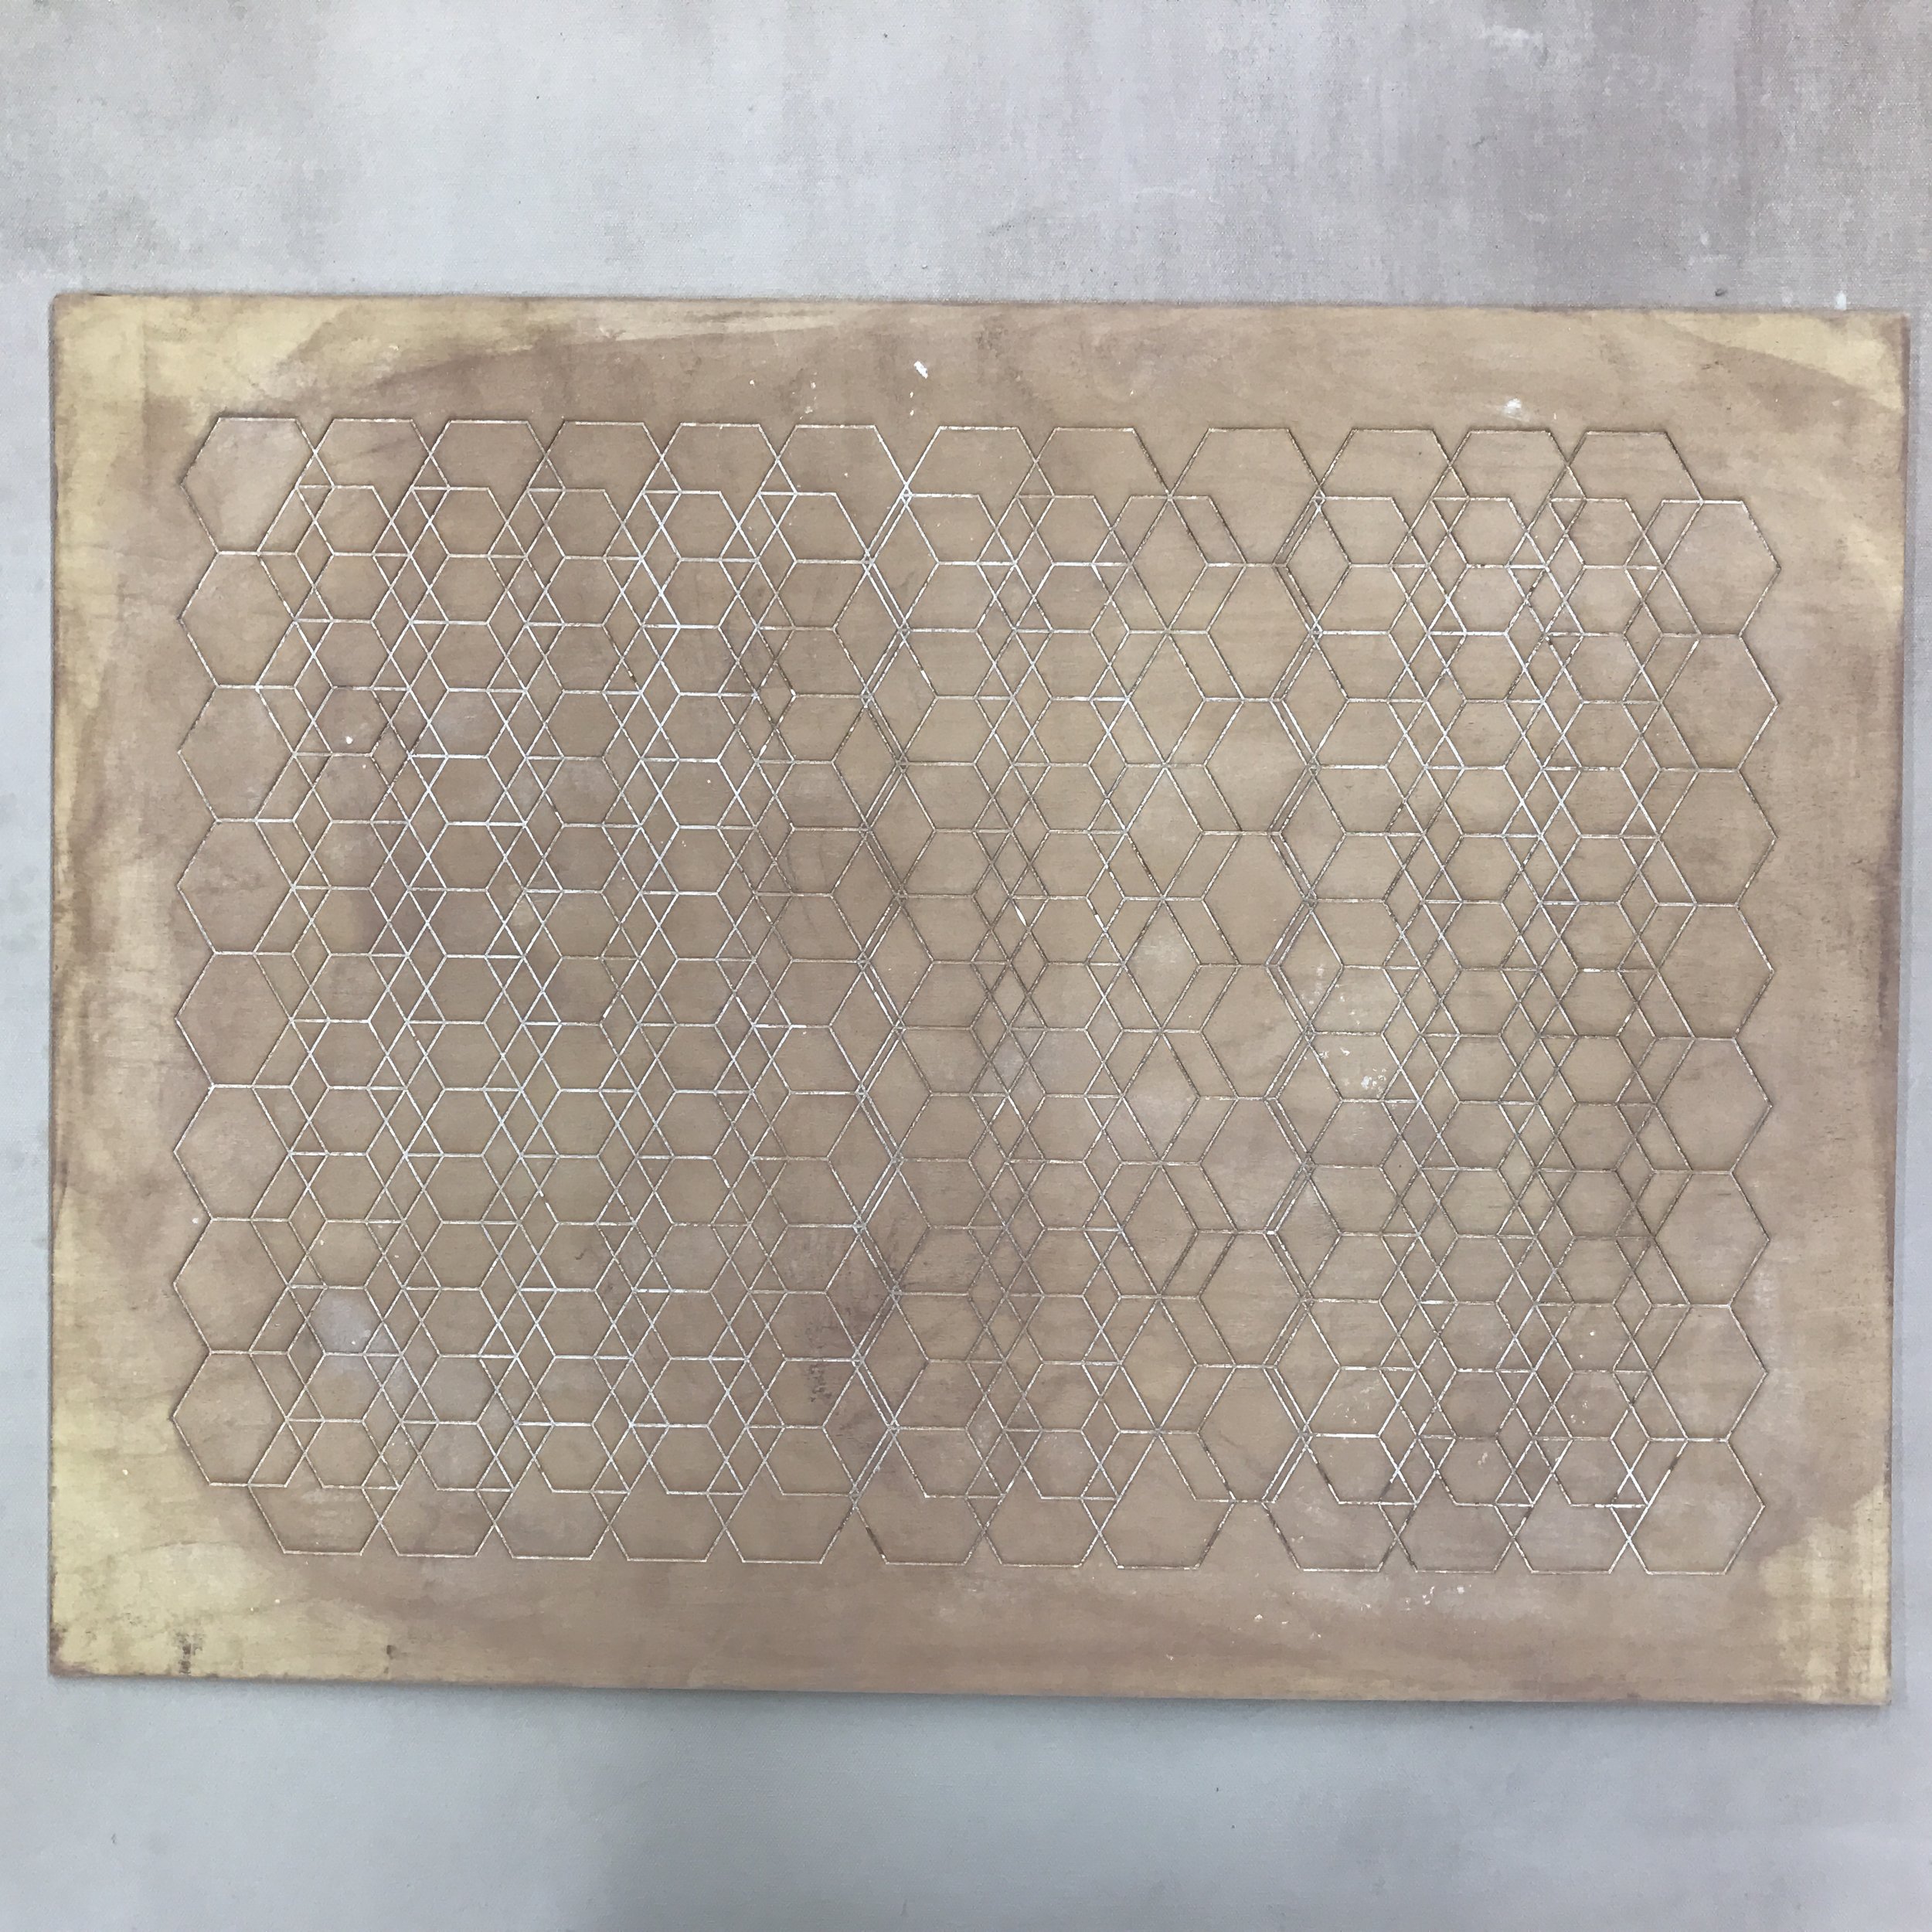 Laser etched wood as a press mold